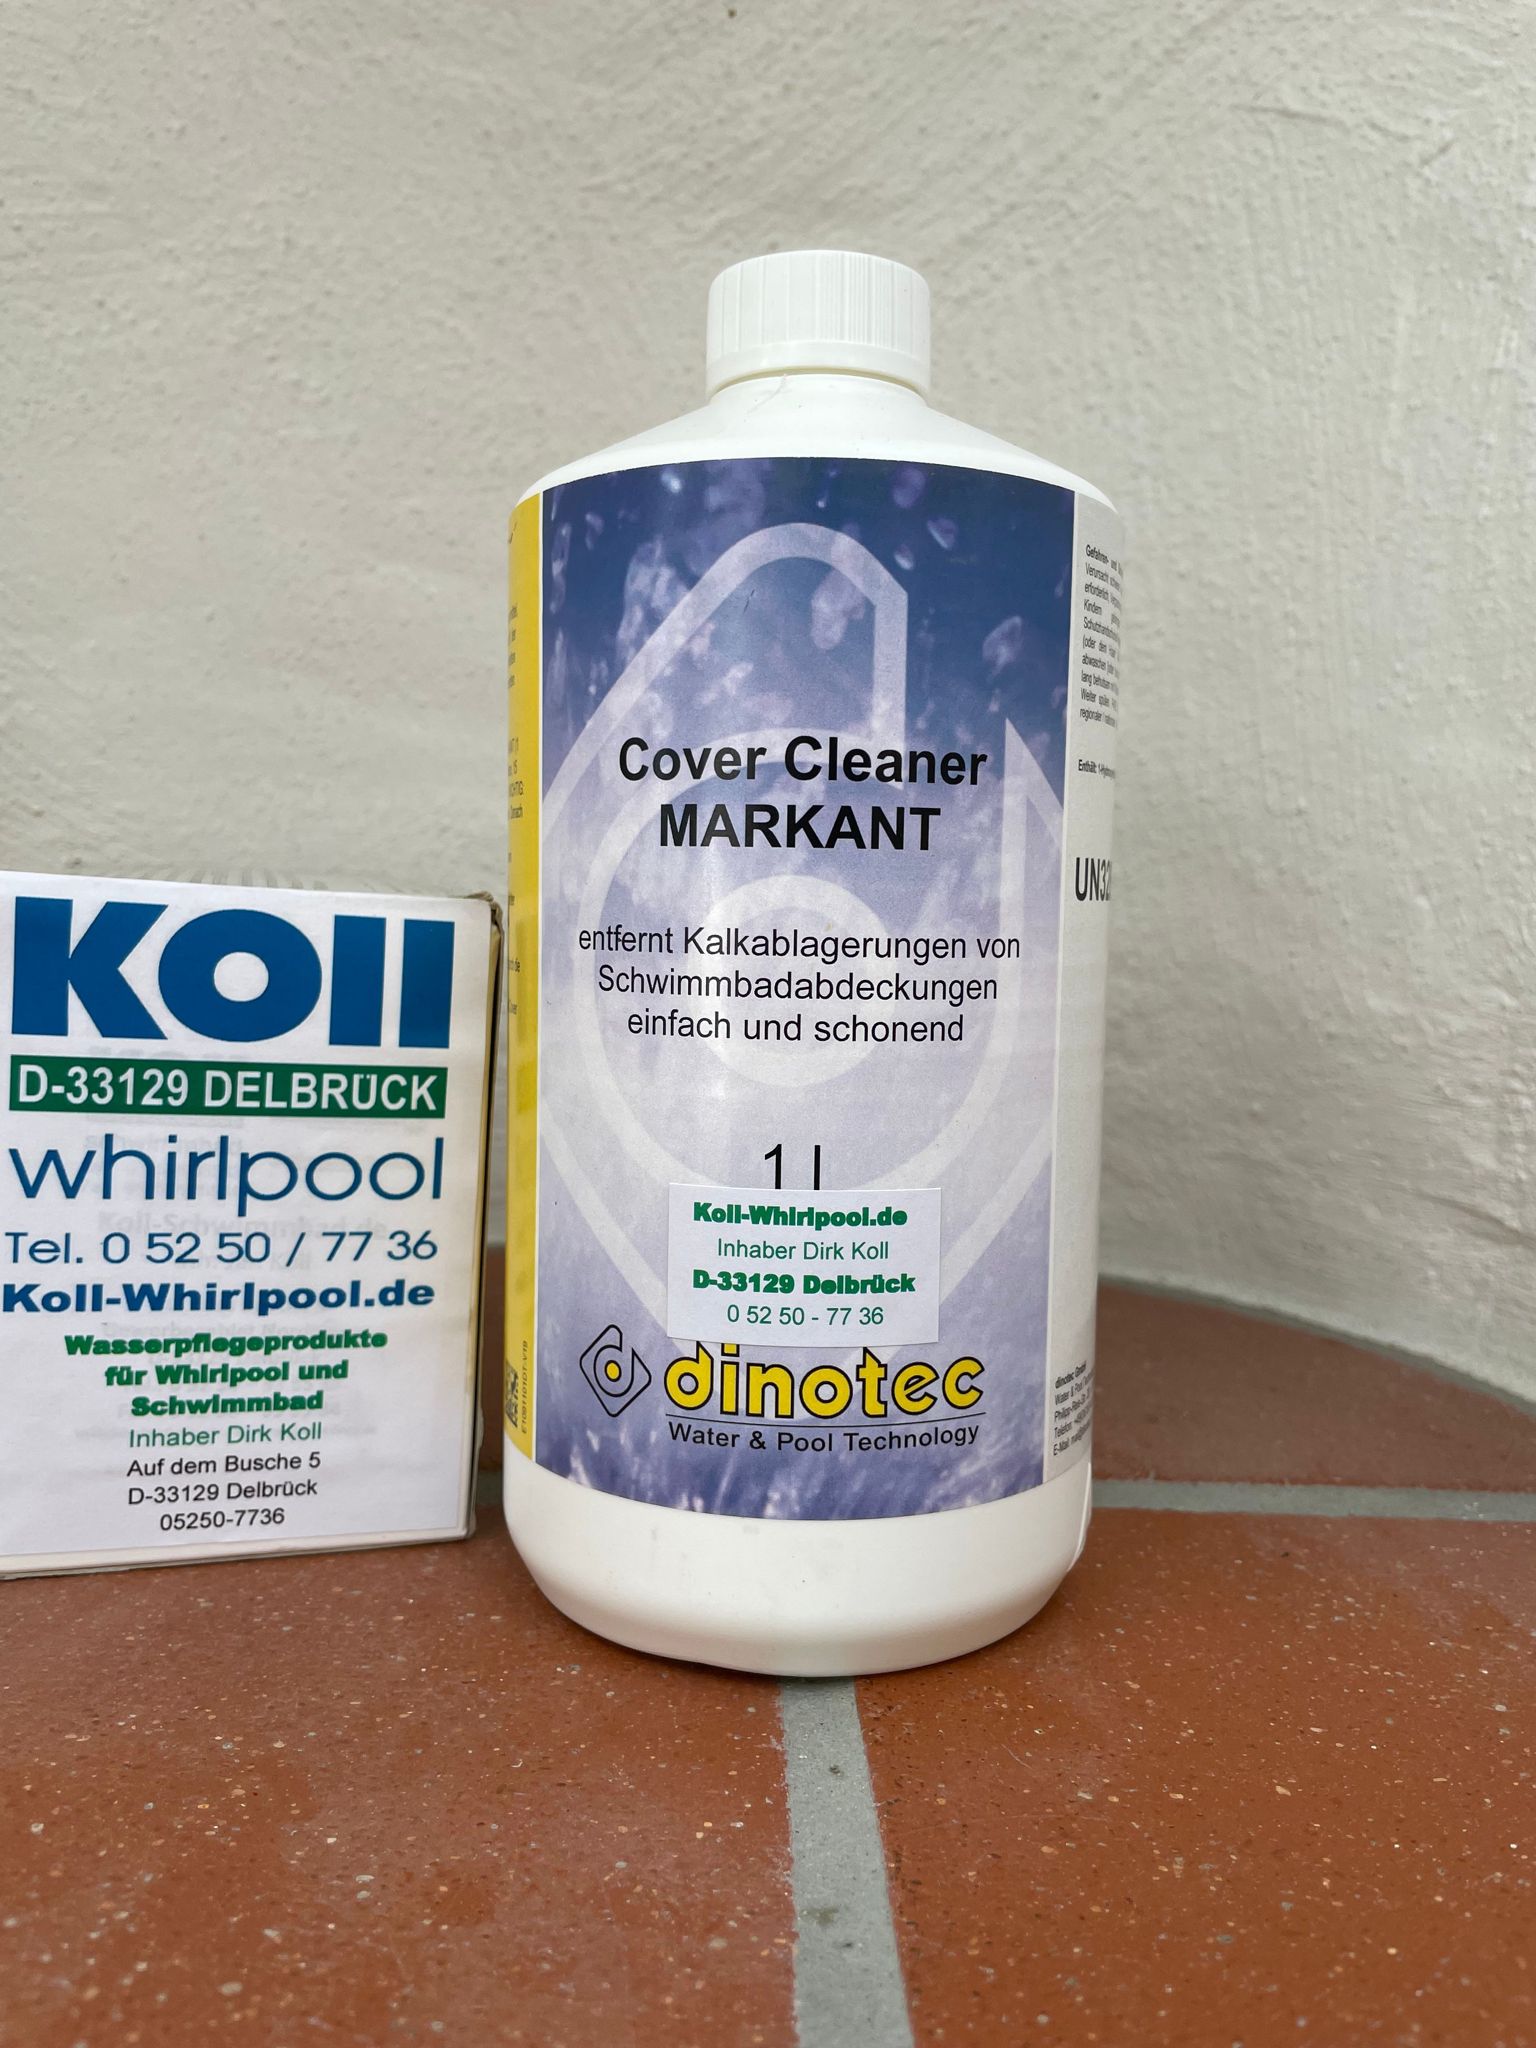 1040-750-01 Cover Cleaner MARKANT 1l Koll-Dinotec